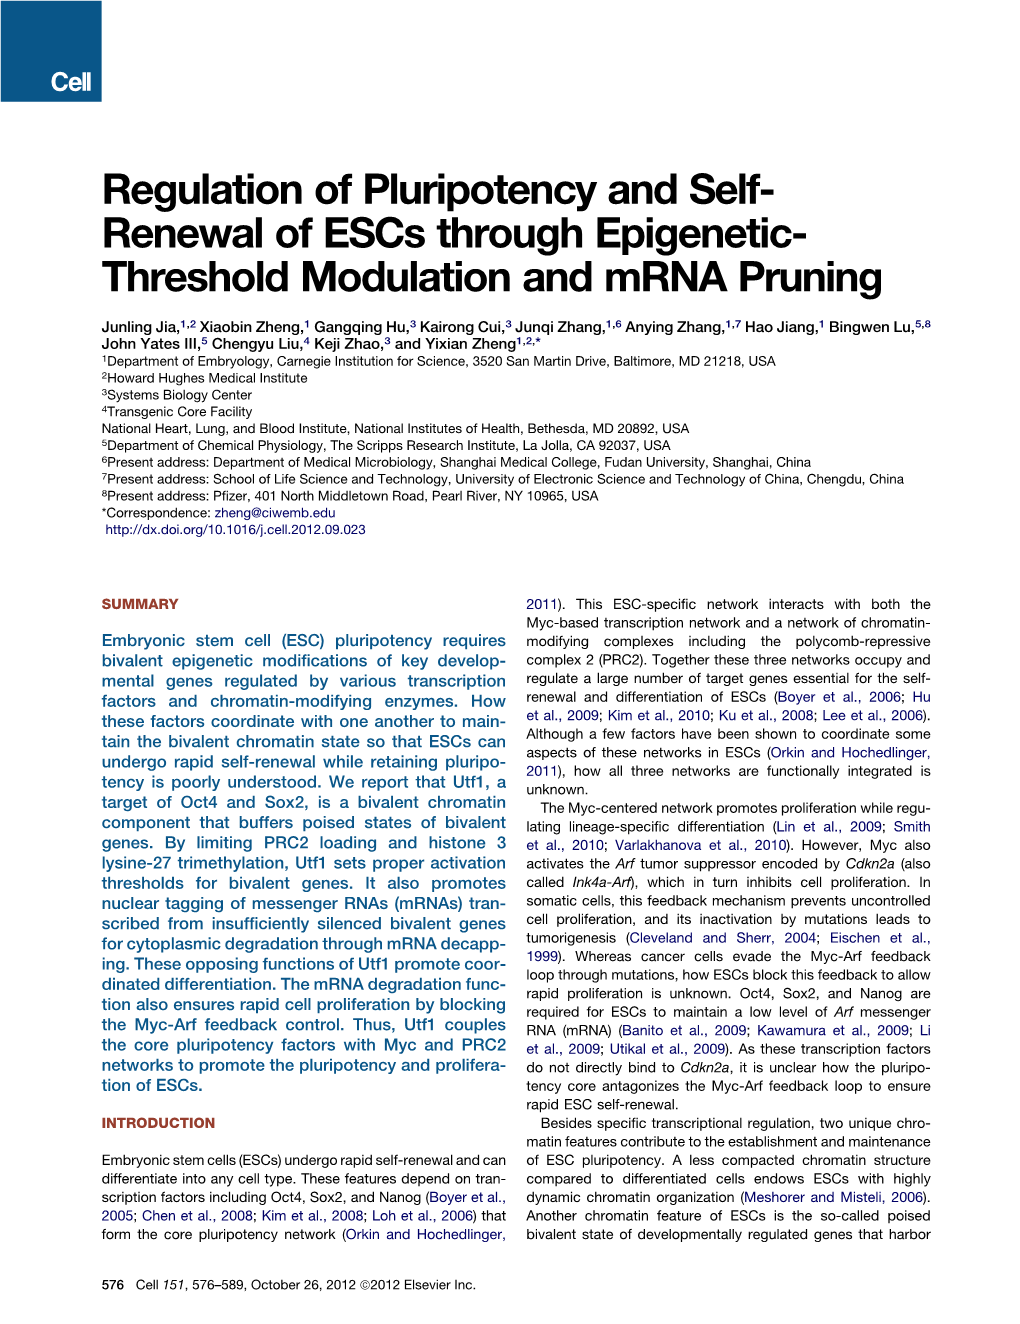 Regulation of Pluripotency and Self- Renewal of Escs Through Epigenetic- Threshold Modulation and Mrna Pruning